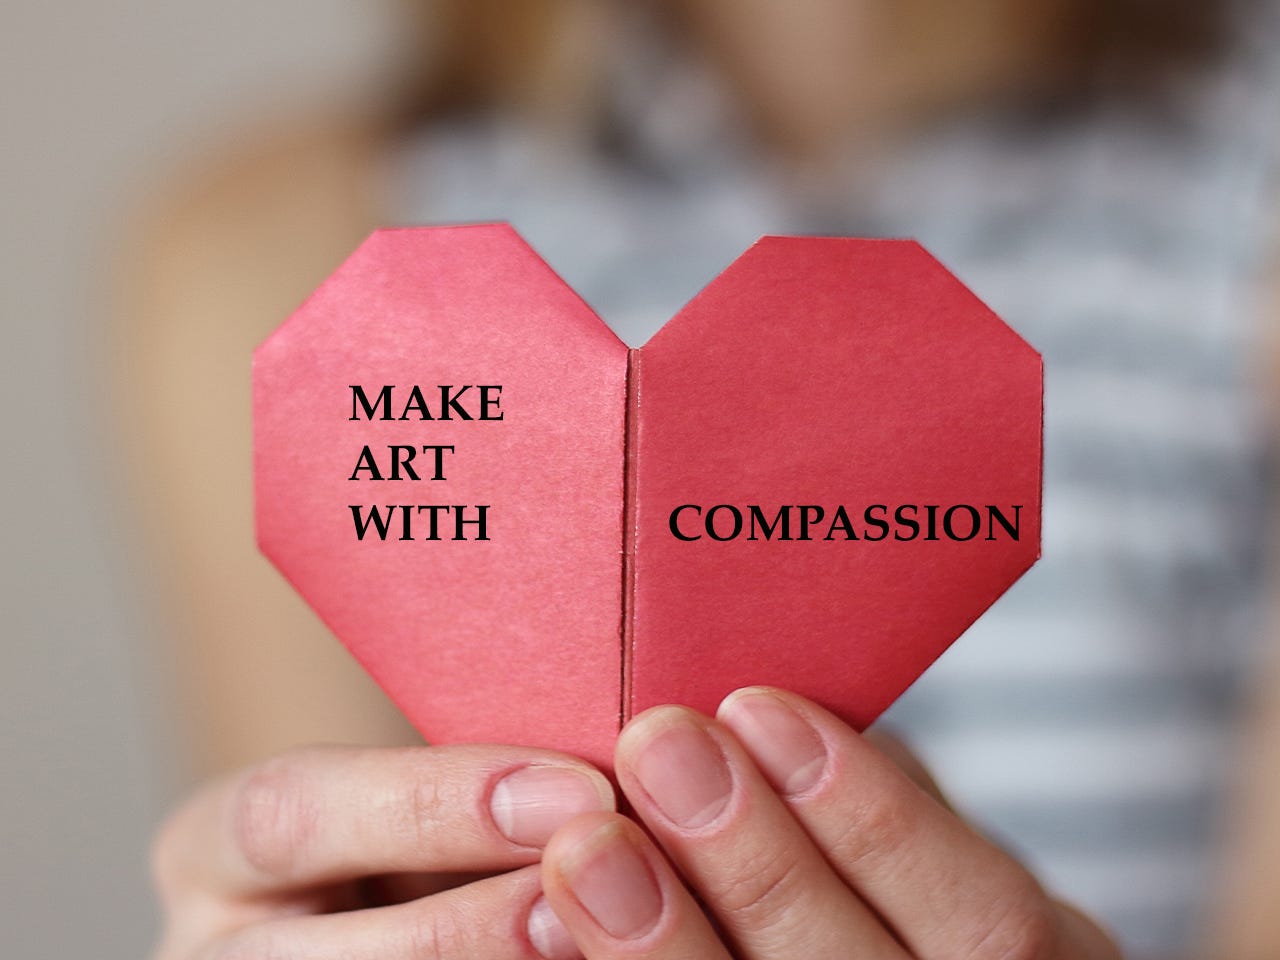 hands holding a heart with the words "Make Art with Compassion" on the heart.